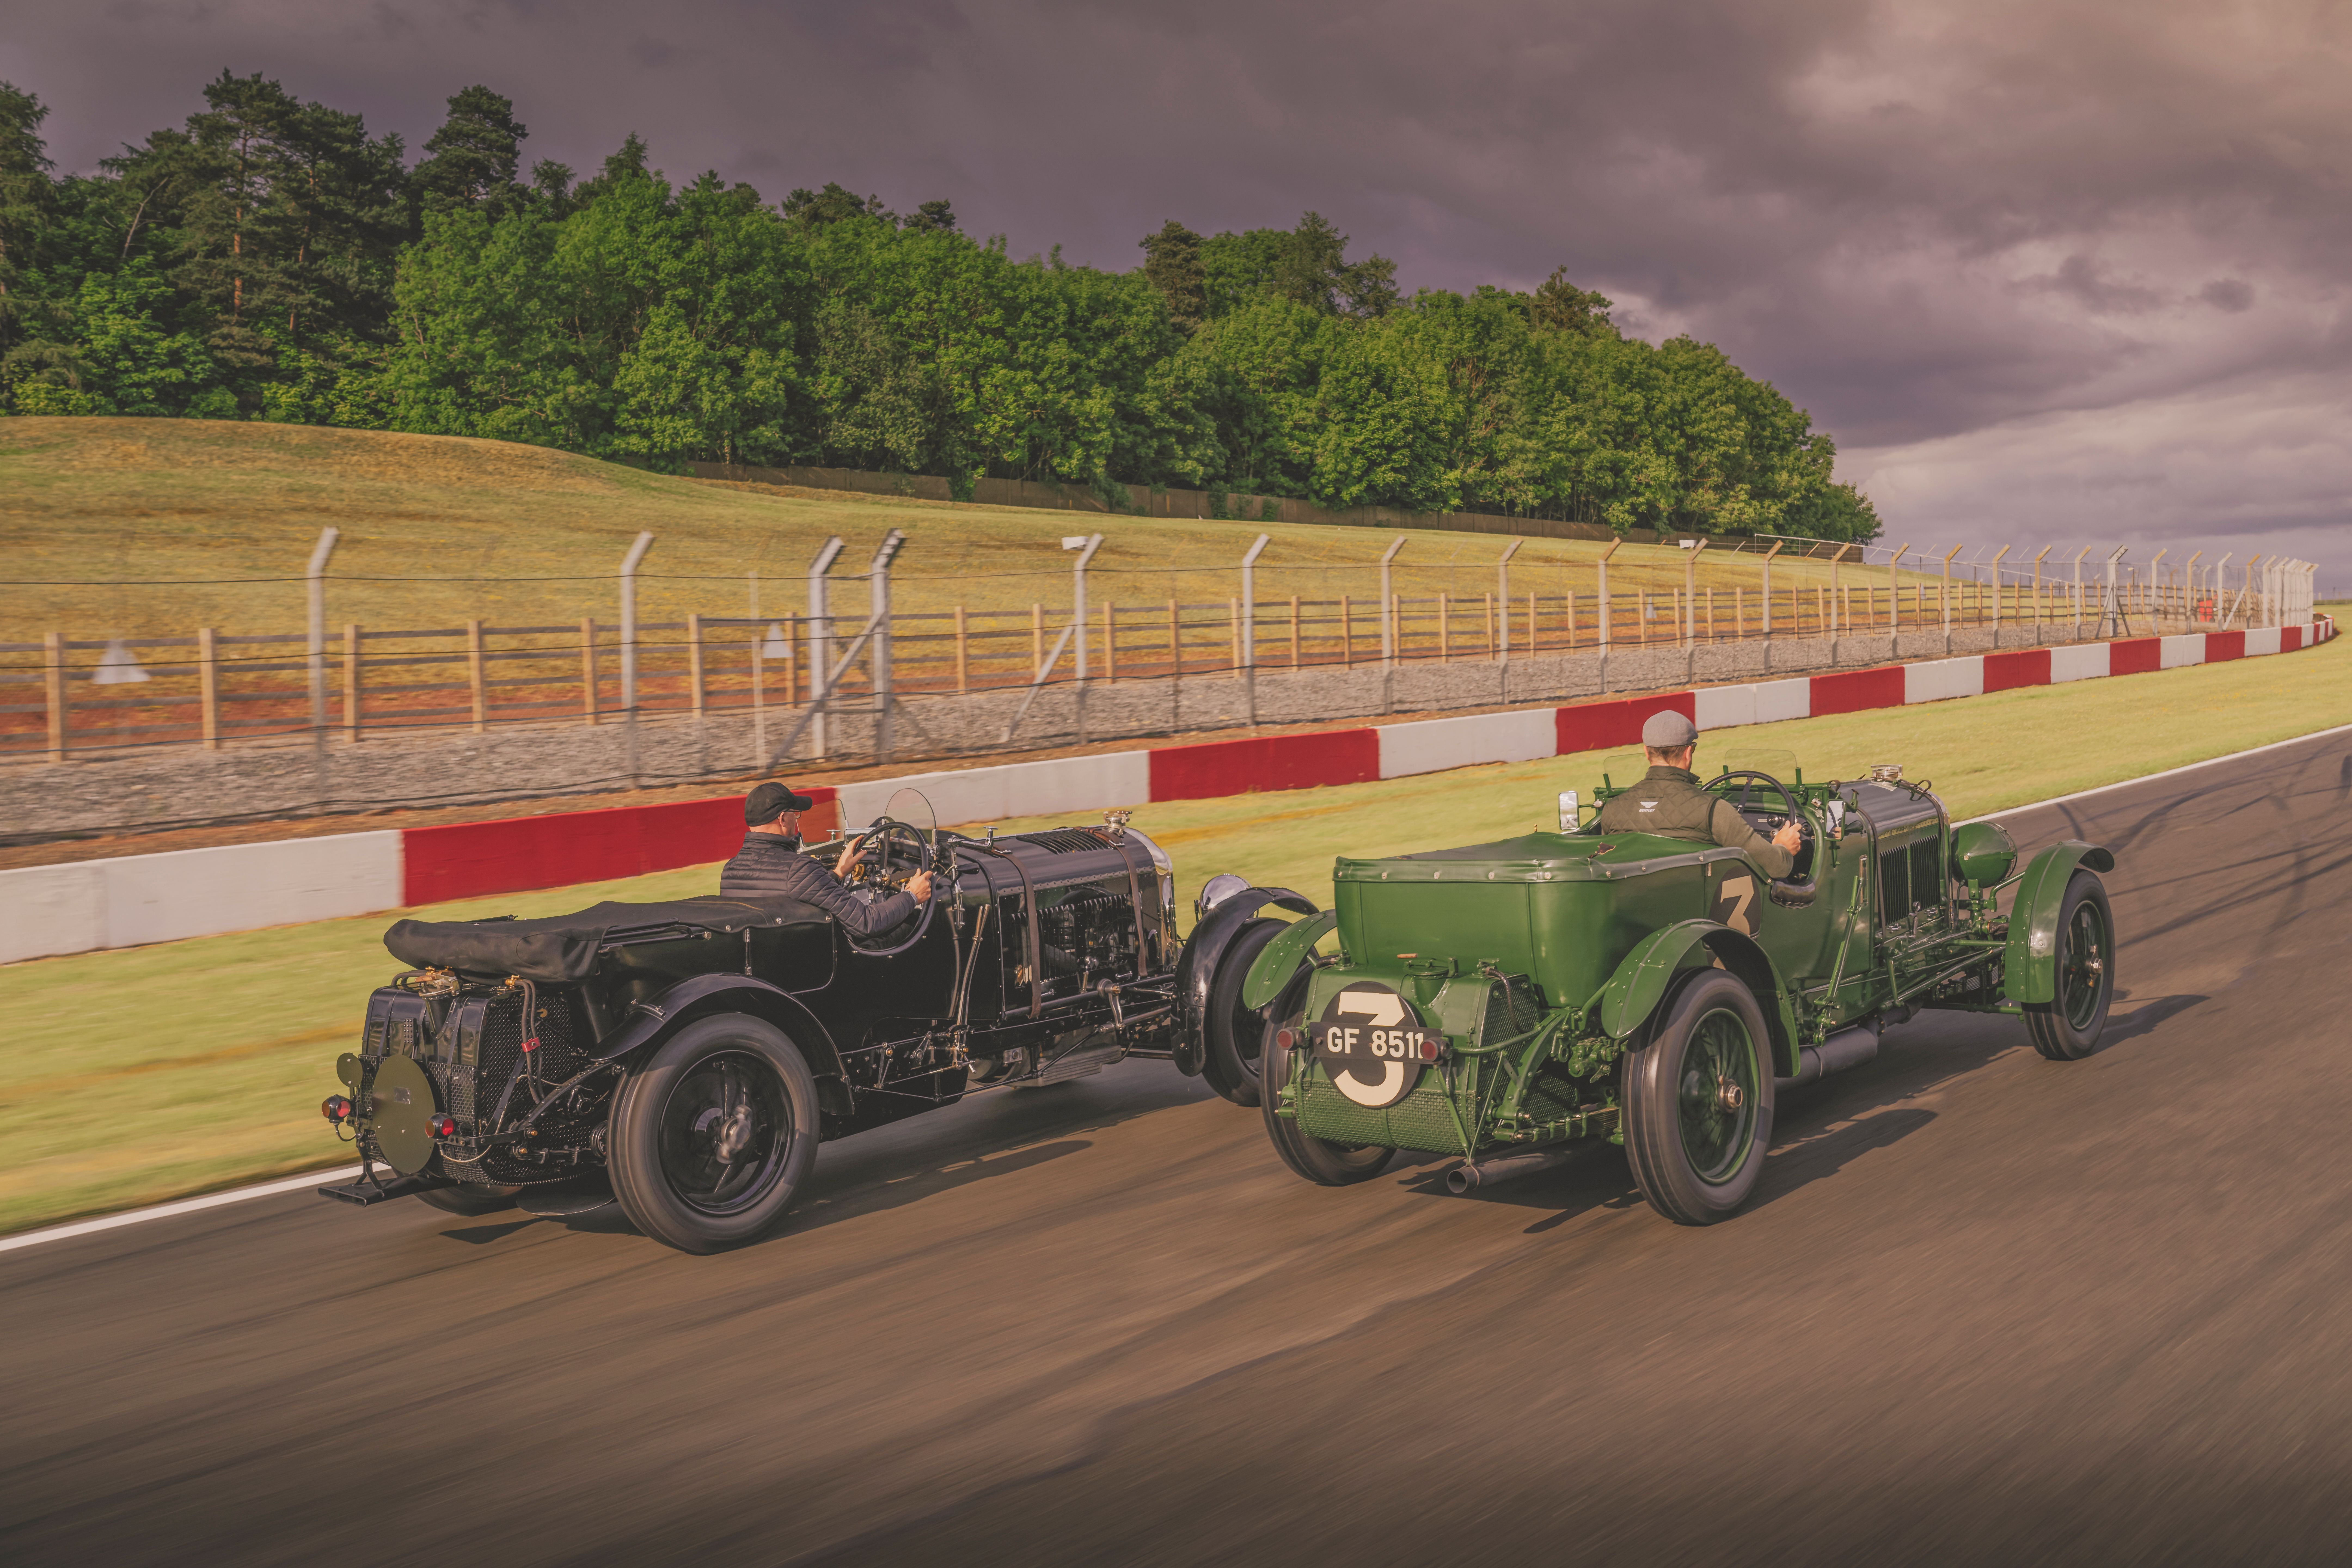 Bentley Speed Six Continuation Series, two cars on track, rear quarter view